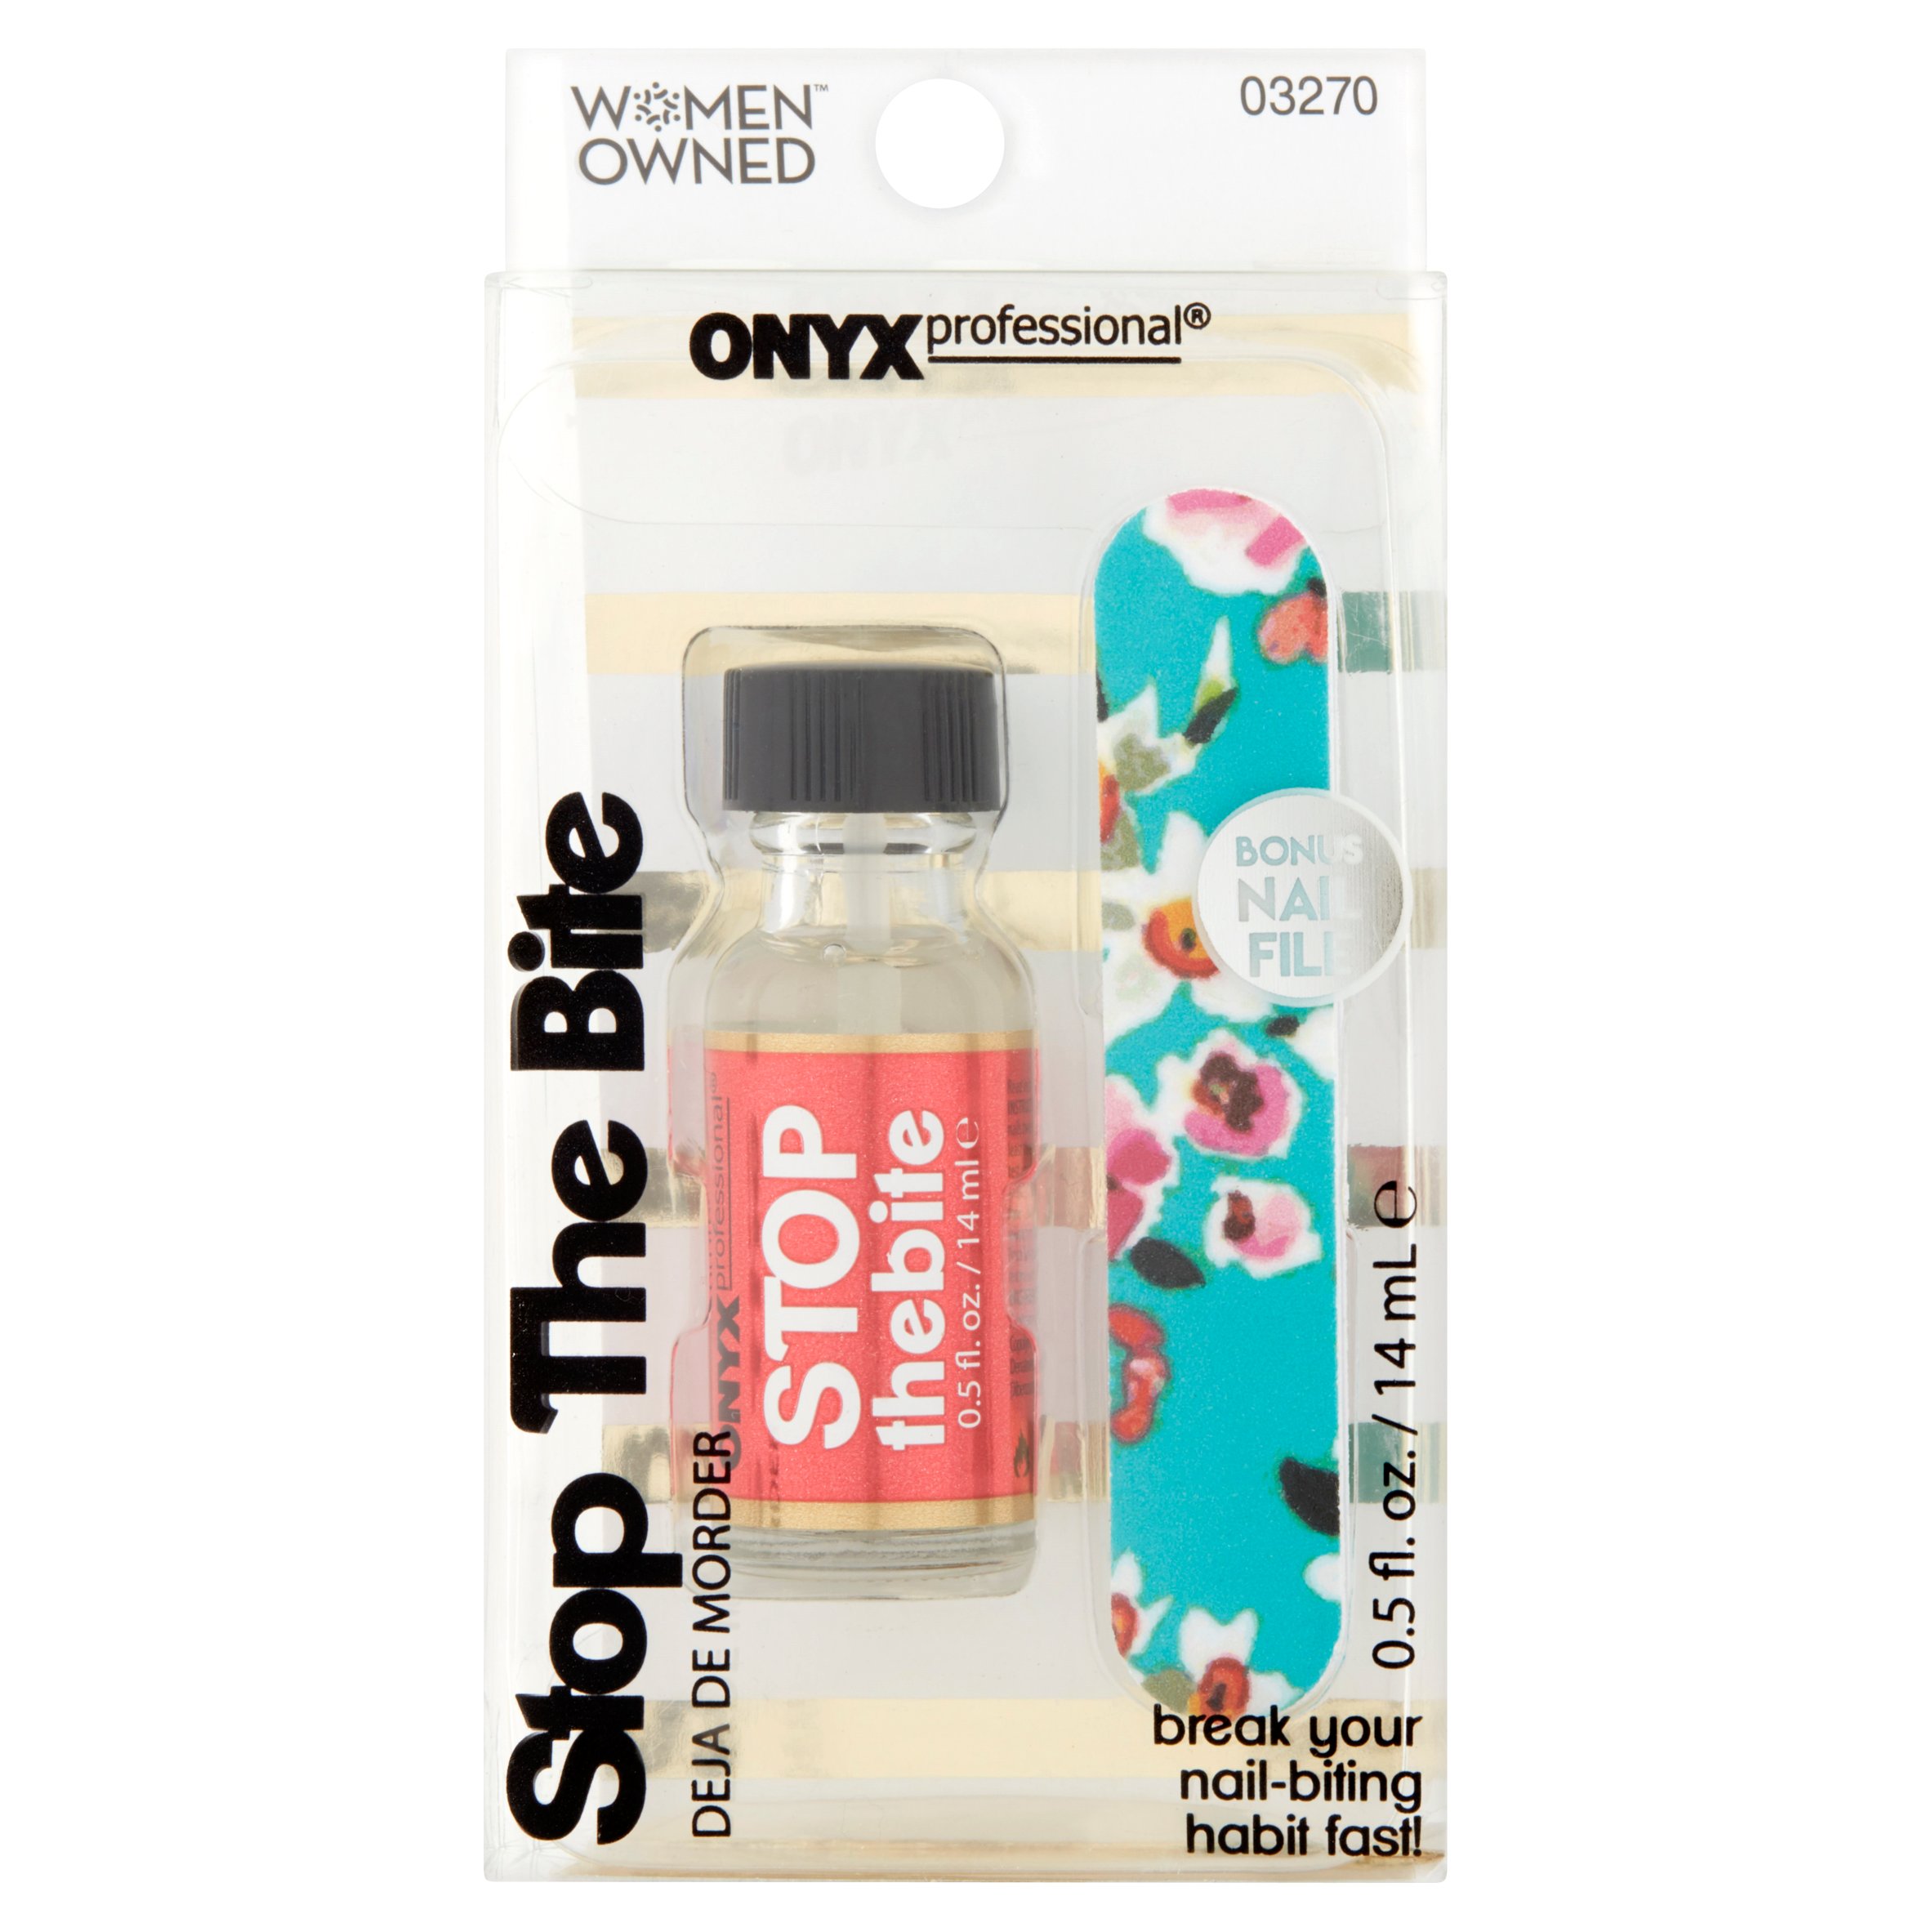 Onyx Professional Stop the Bite Nail-Biting Deterrent and File, 0.5 fl oz - image 1 of 4